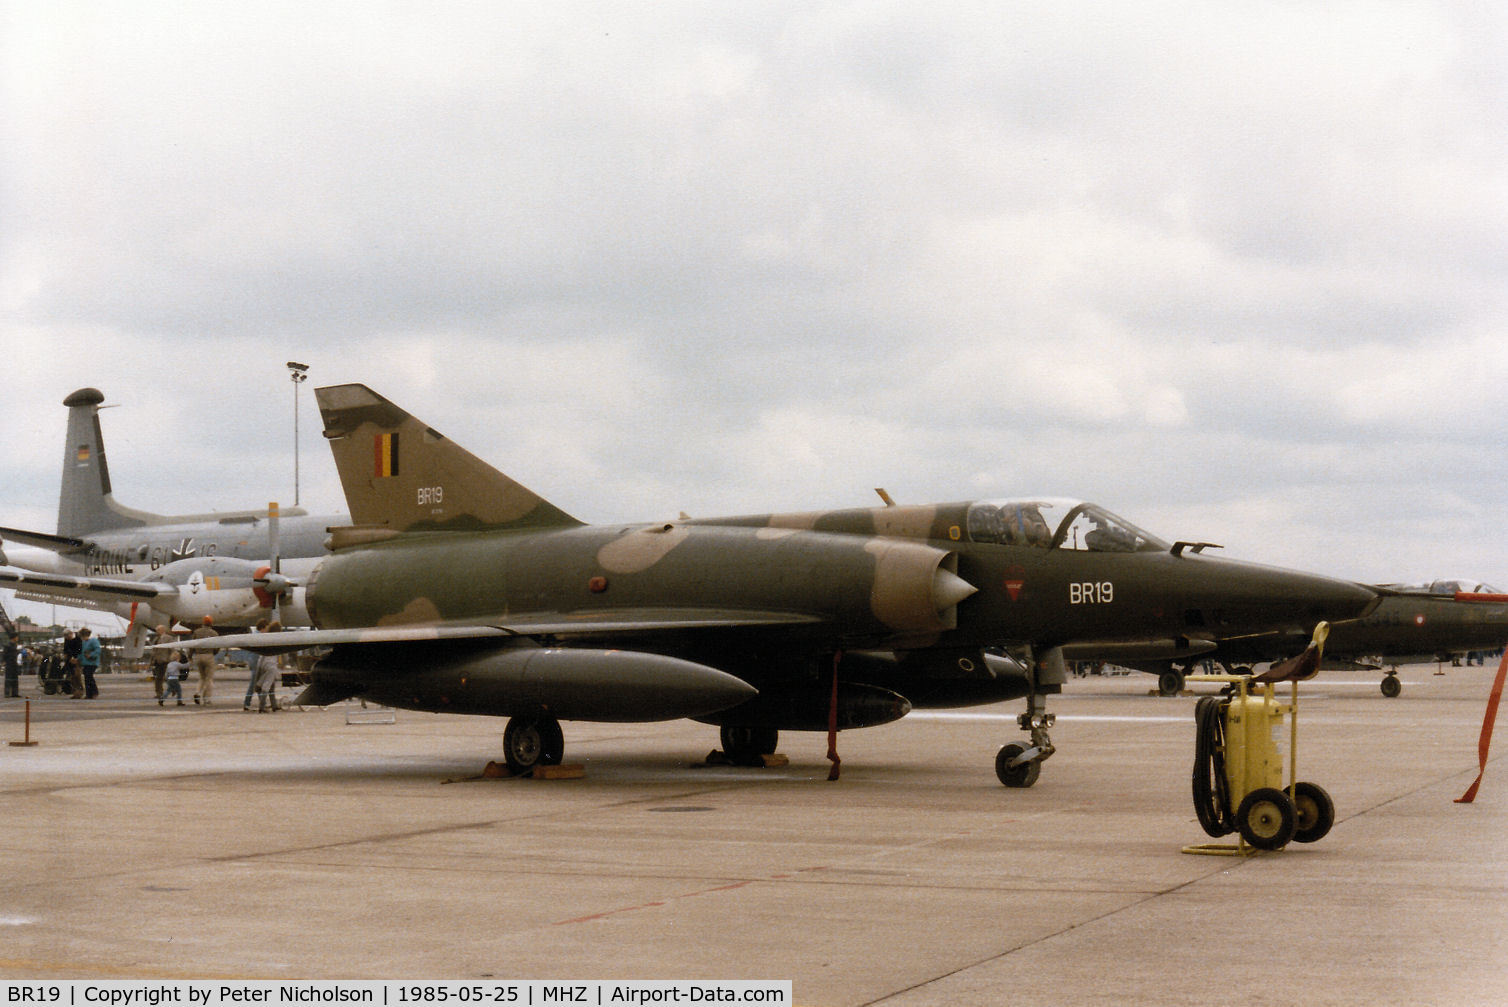 BR19, SABCA Mirage 5BR C/N 319, Belgian Air Force Mirage 5BR of 42 Squadron on display at the 1985 RAF Mildenhall Air Fete.